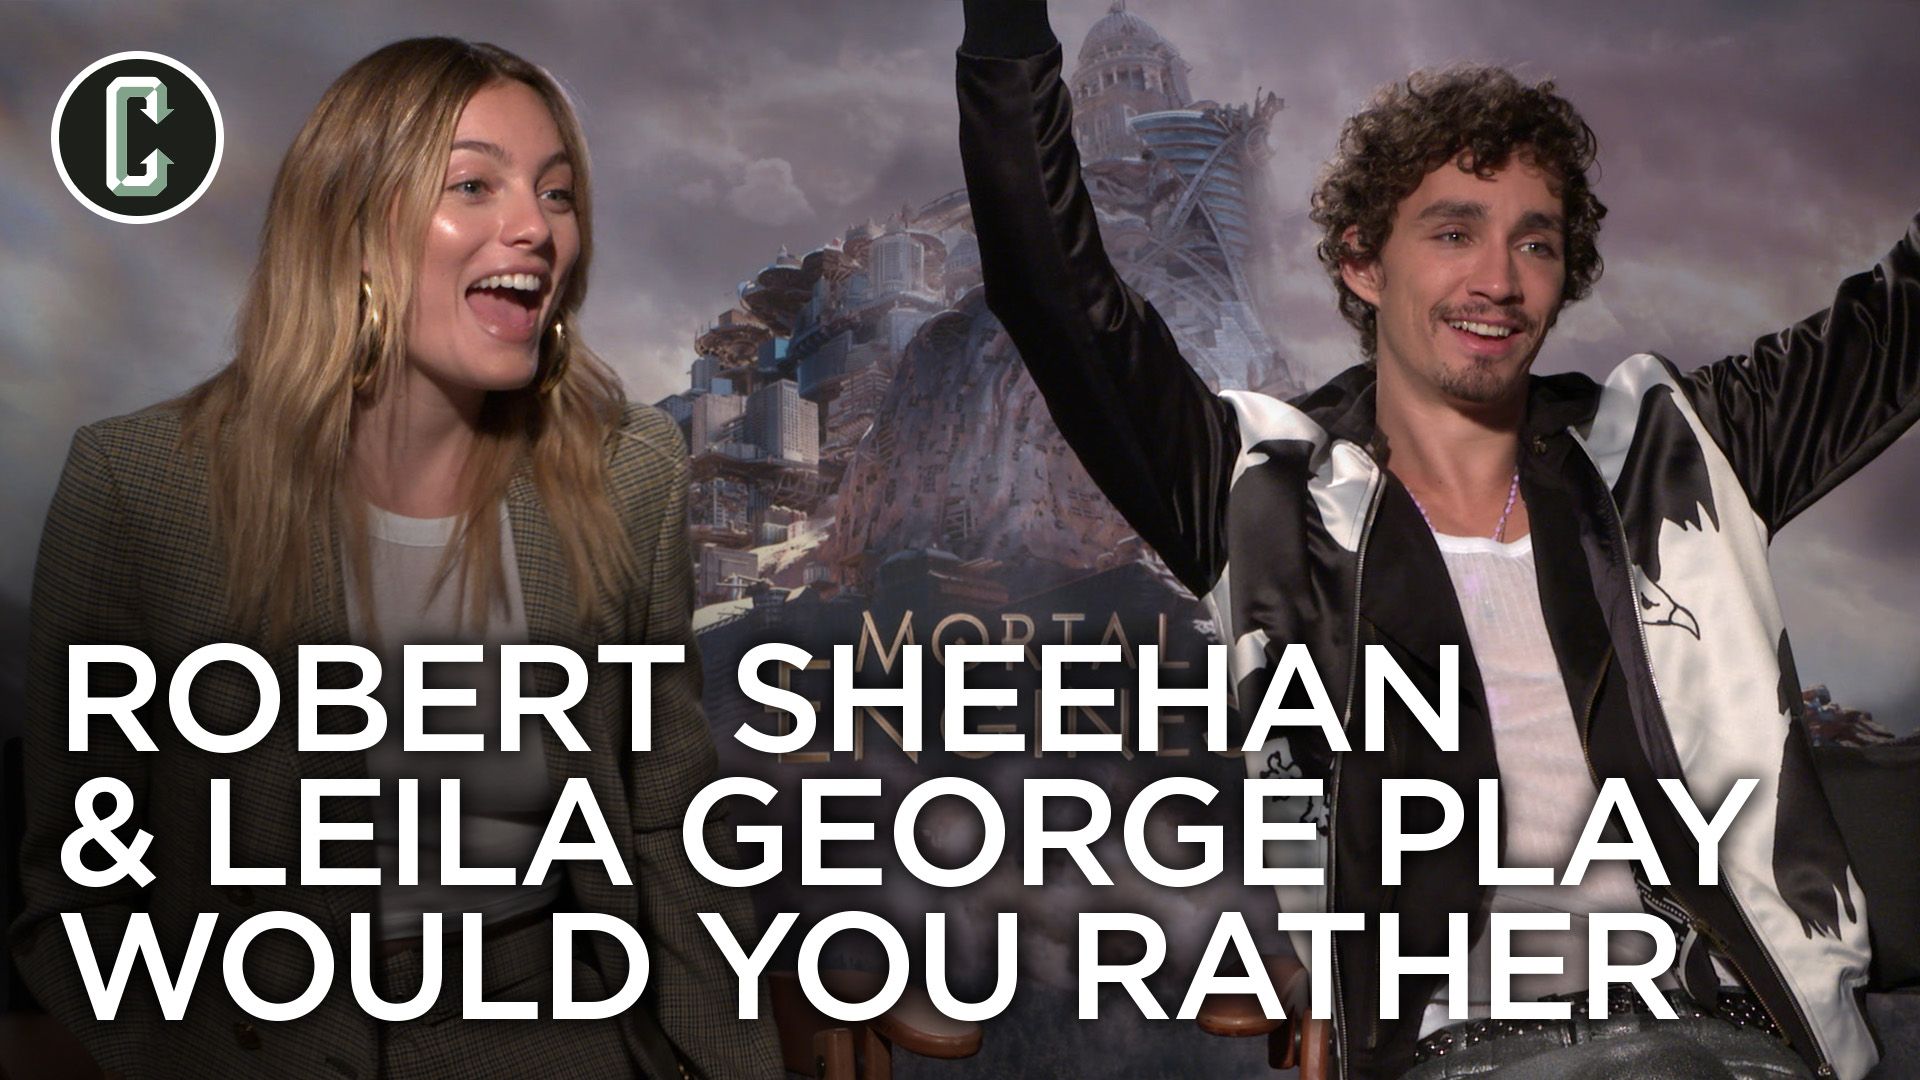 Mortal Engines: Robert Sheehan & Leila George Play Would You Rather | Collider